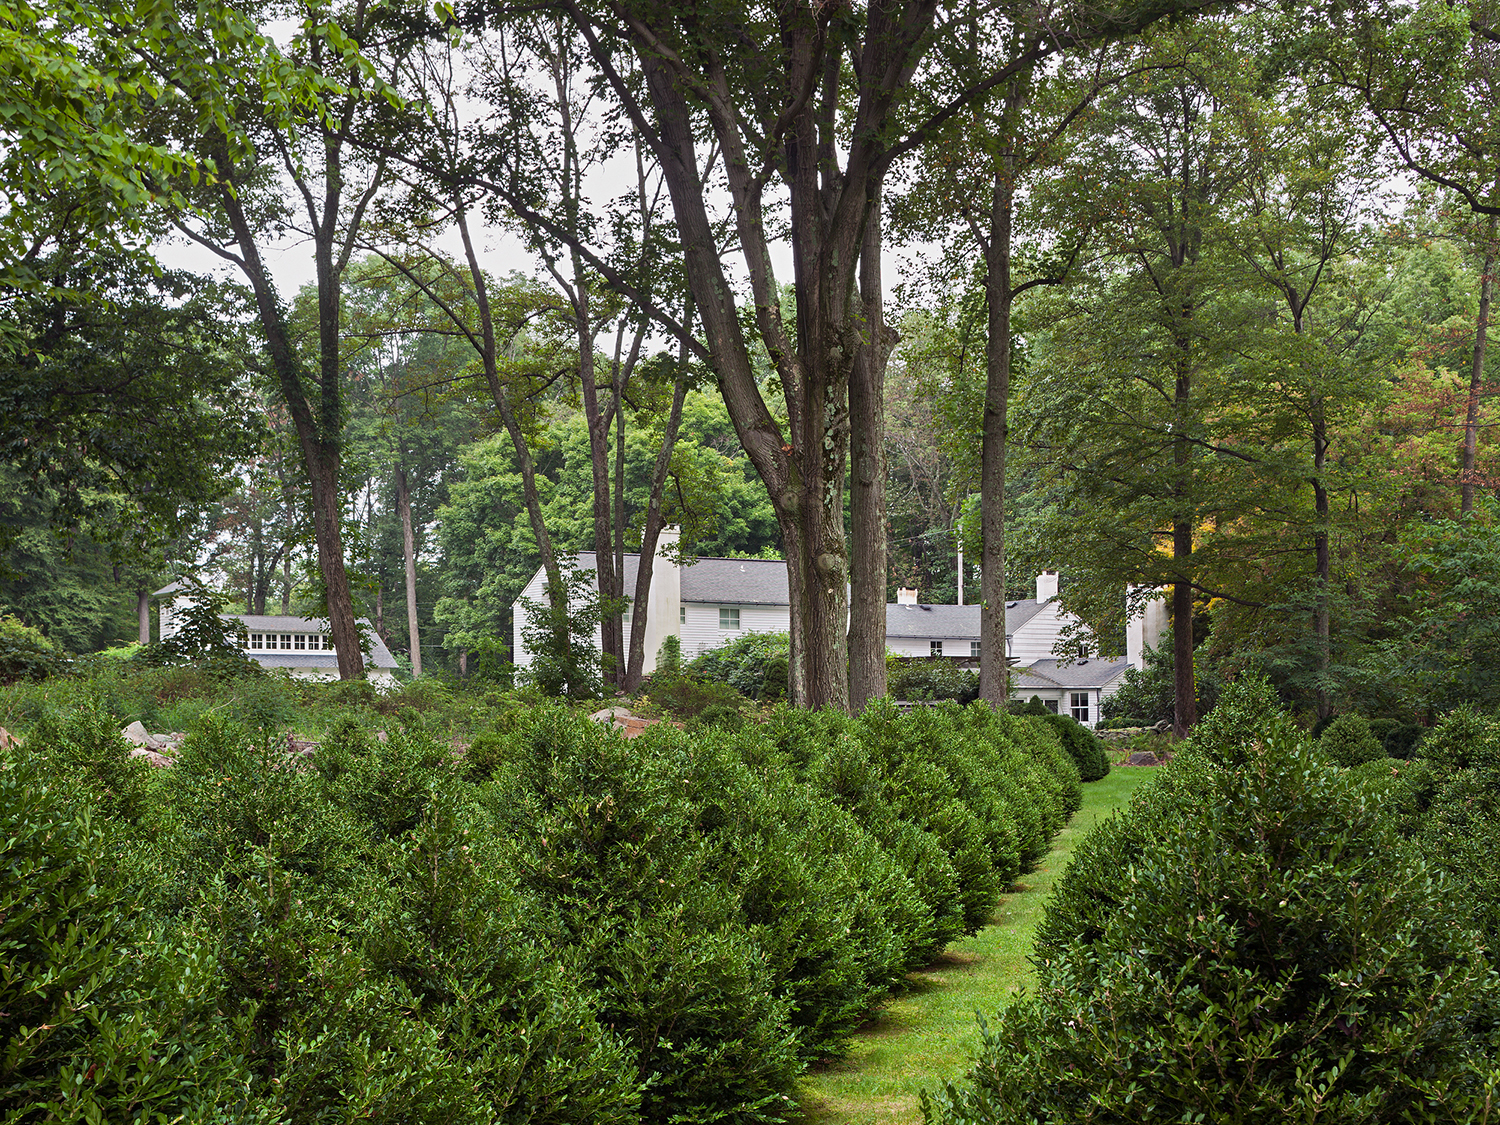 AT THE BOXWOOD FARM, THE GARDENS REFER TO THE AREA'S AGRICULTURAL PAST